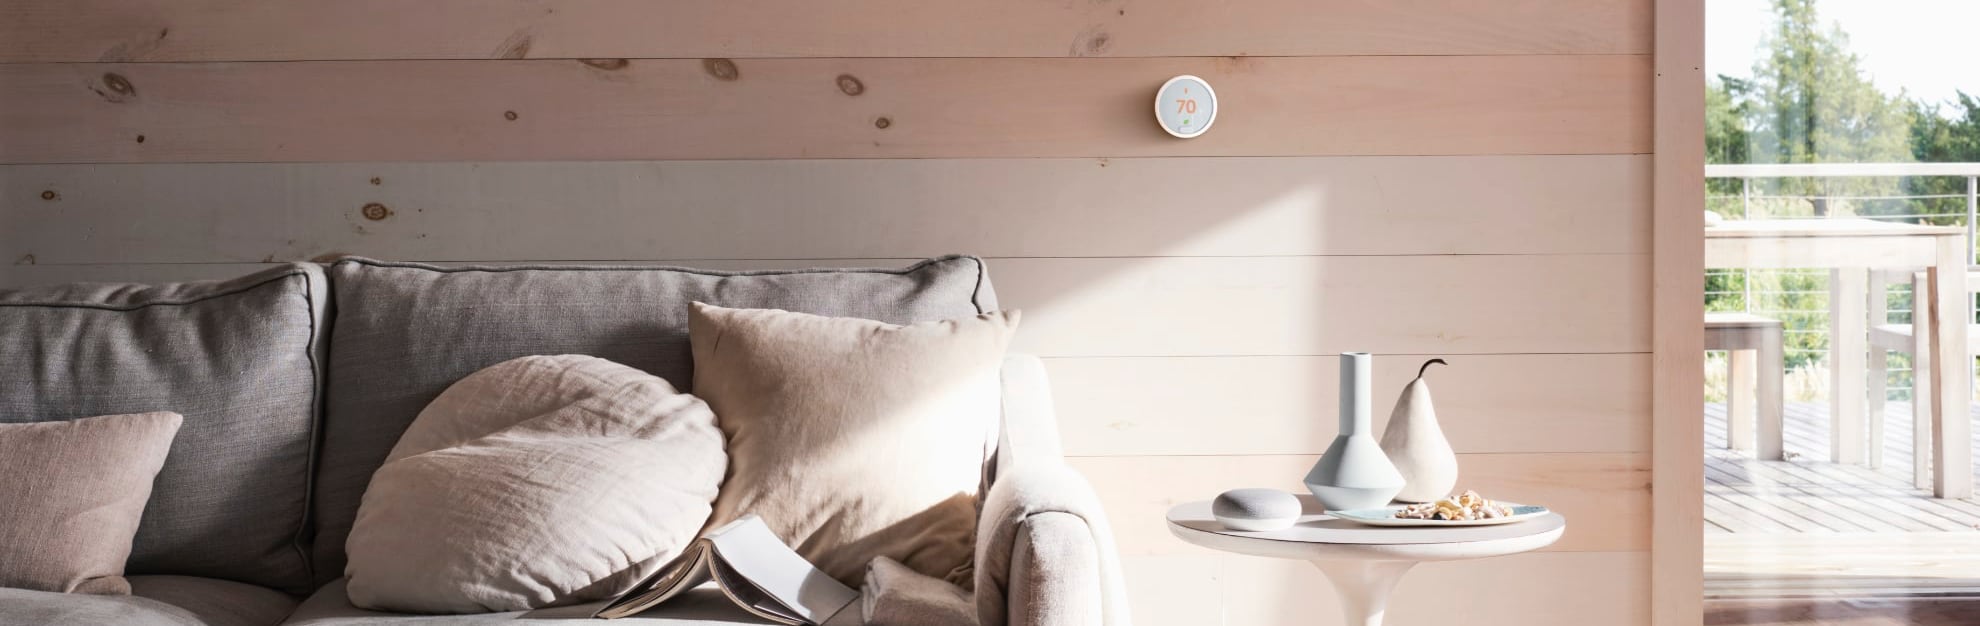 Vivint Home Automation in Salinas